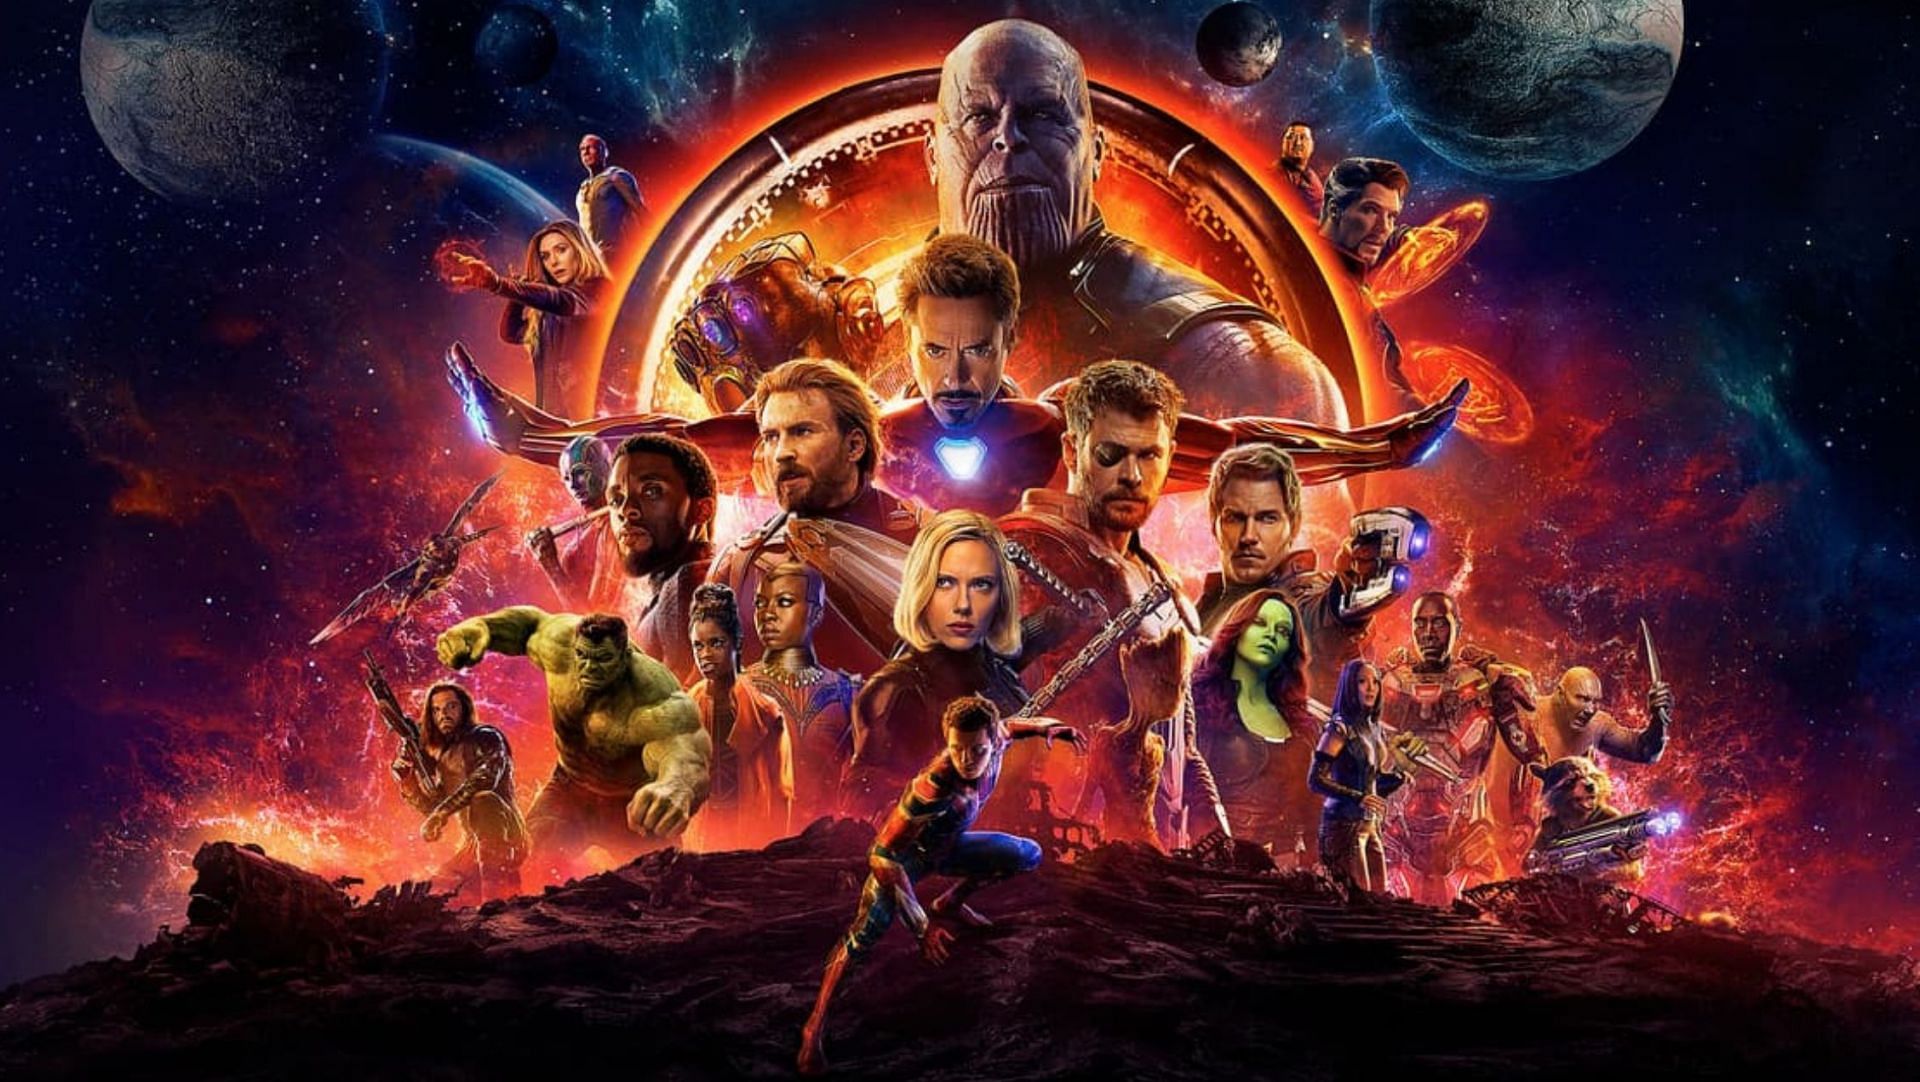 Two of the greatest superhero movies of all time - Avengers: Endgame and Avengers: Infinity War. Which one will come out on top? (Image via Marvel Studios)